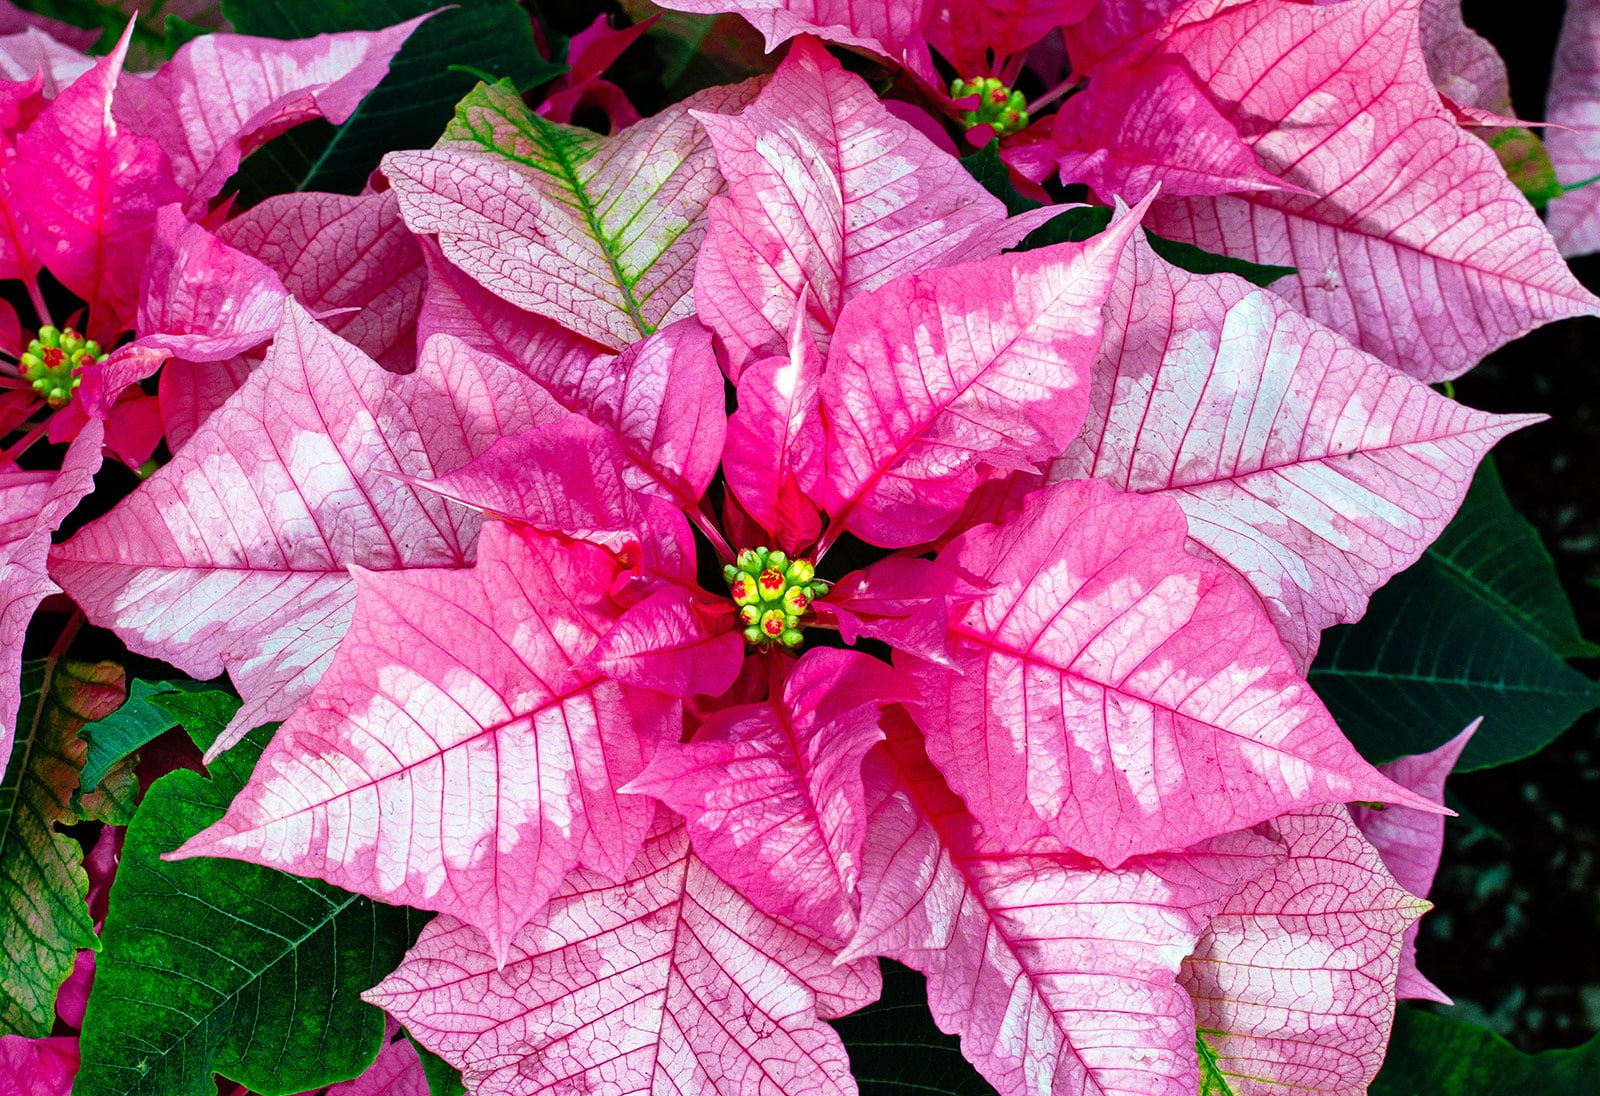 Pink and white patterned poinsettia plant